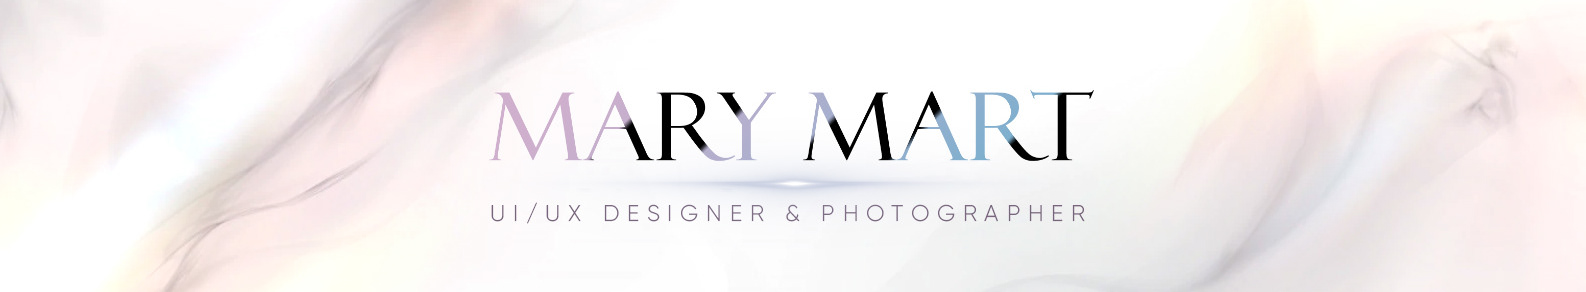 Maria Martyniuk's profile banner